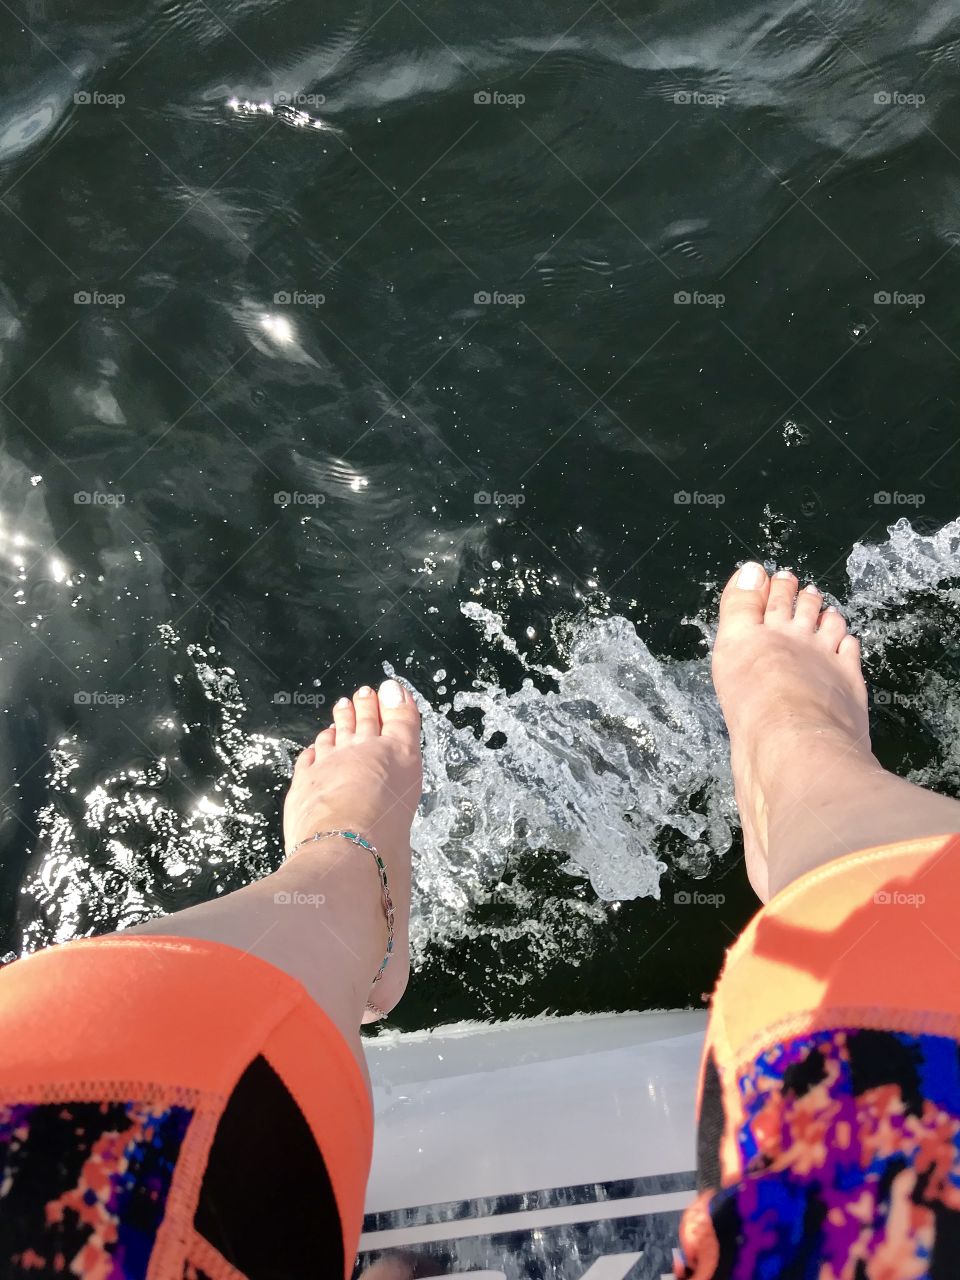 Hanging 10 over the side of the sailboat to feel the cool water spray